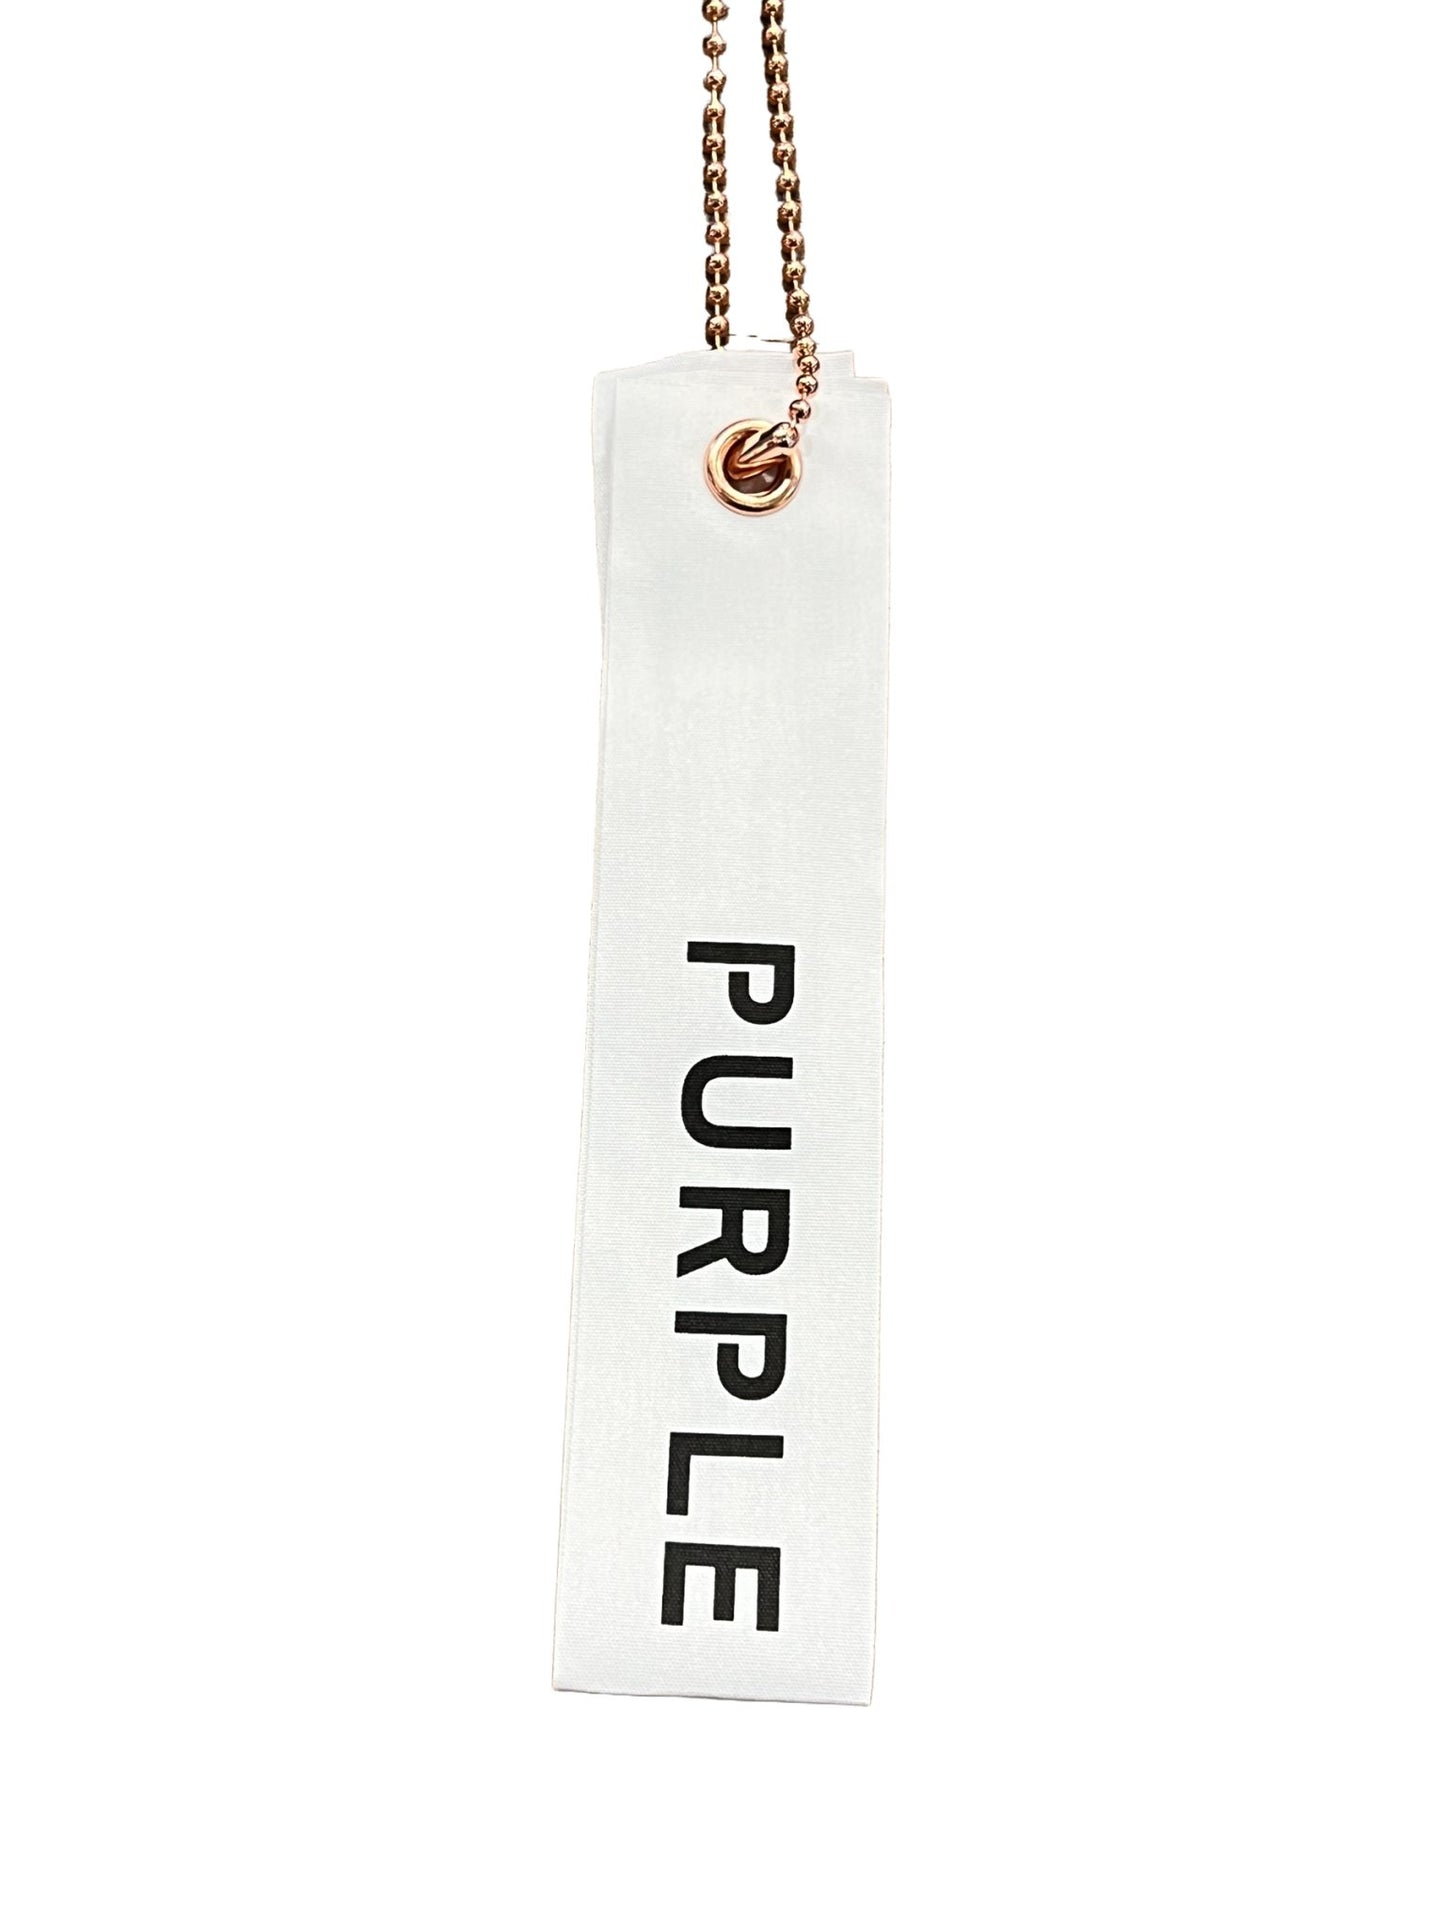 A WHITE TEXTURED JERSEY LABEL WITH THE WORD "PURPLE" PRINTED IN BLACK, HANGING FROM A BRONZE CHAIN.